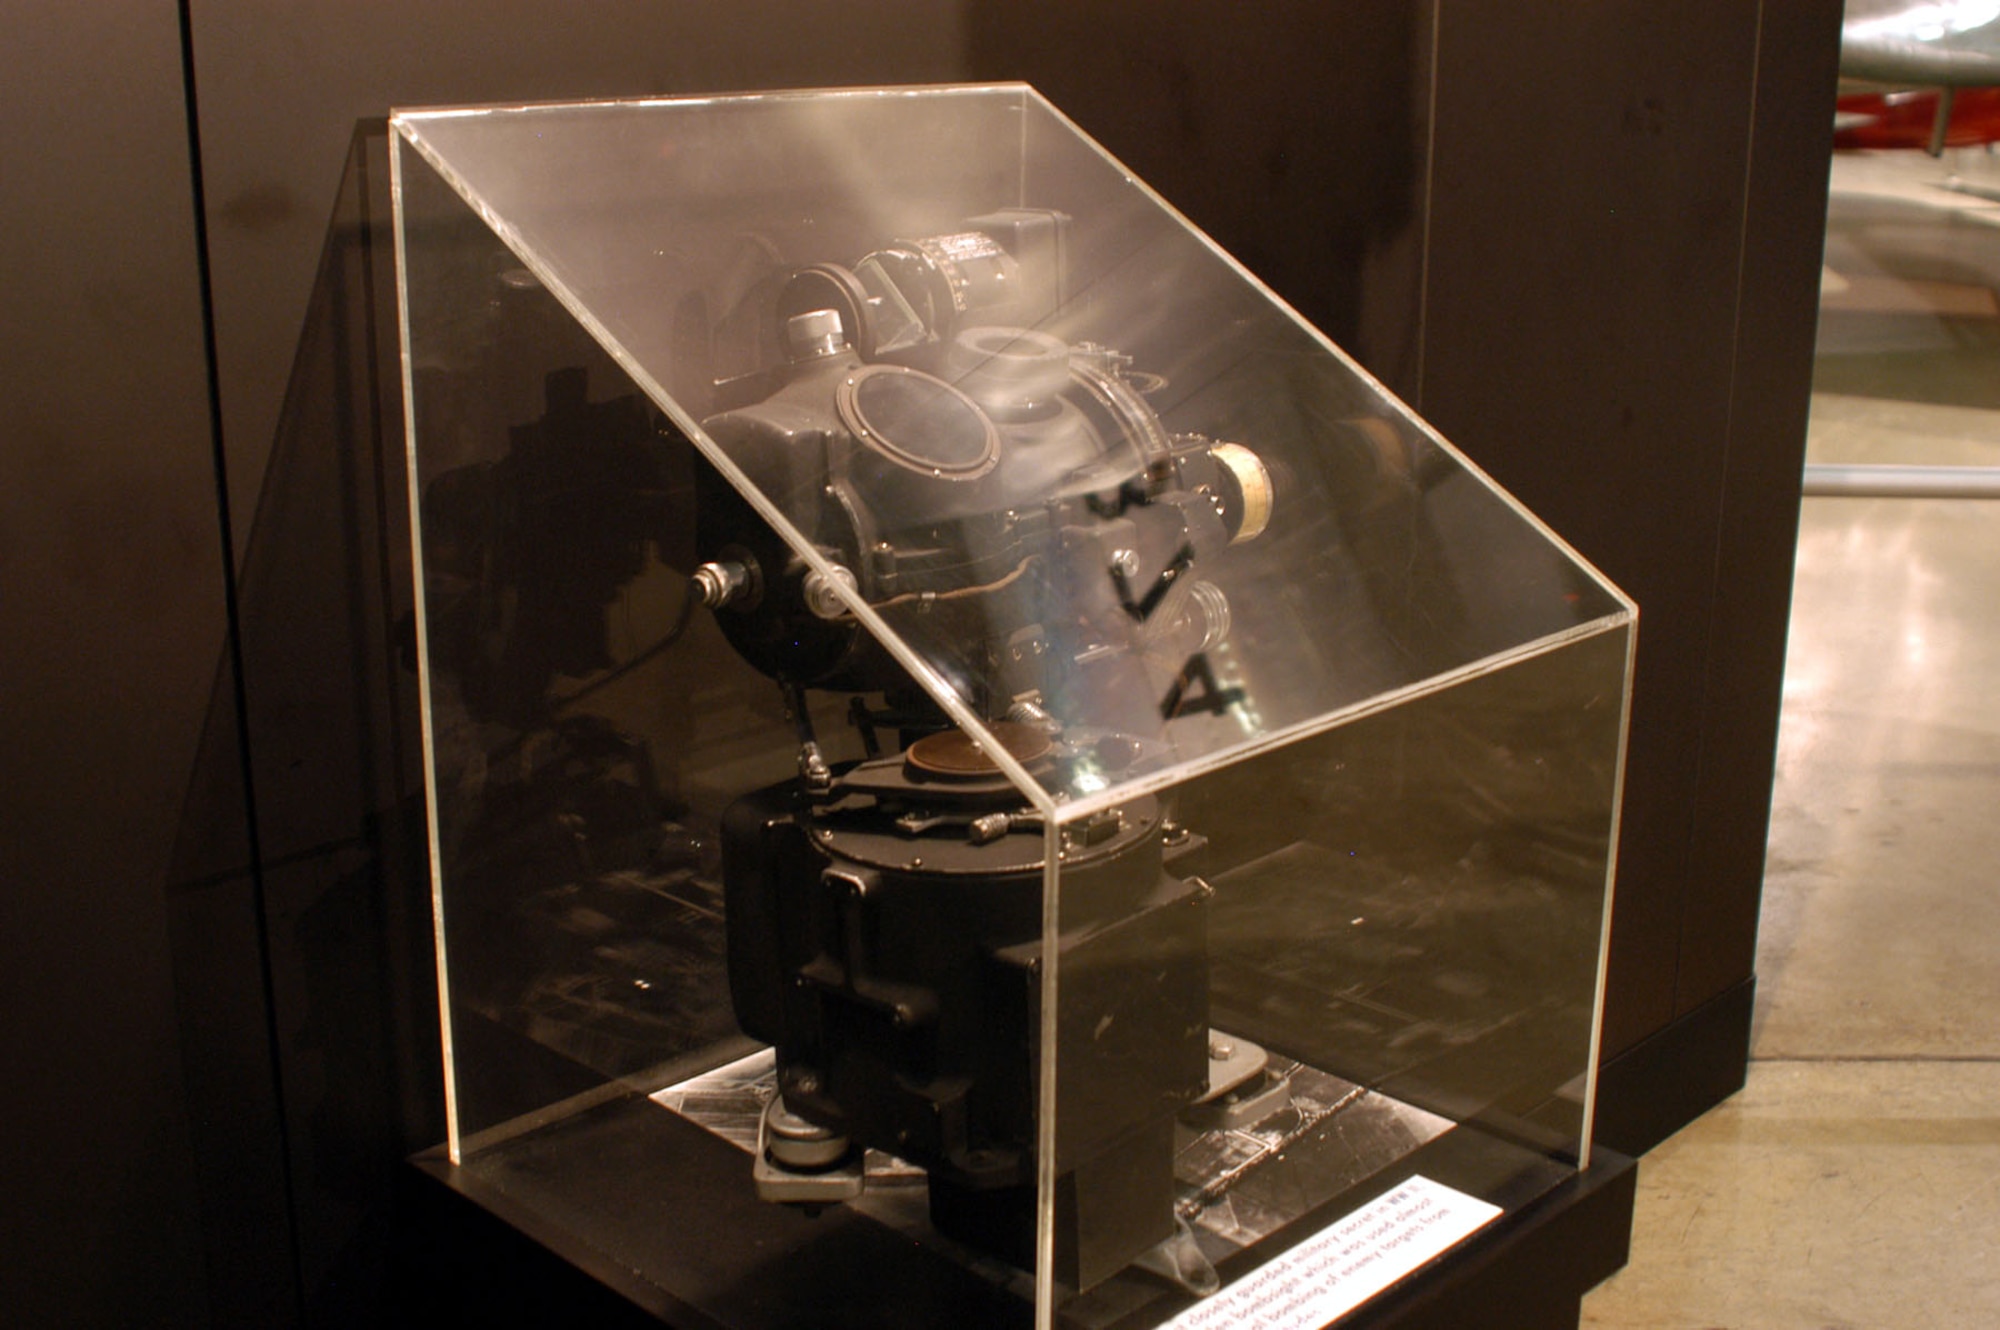 DAYTON, Ohio -- Norden Bombsight displayed in the World War II Gallery at the National Museum of the United States Air Force. (U.S. Air Force photo)